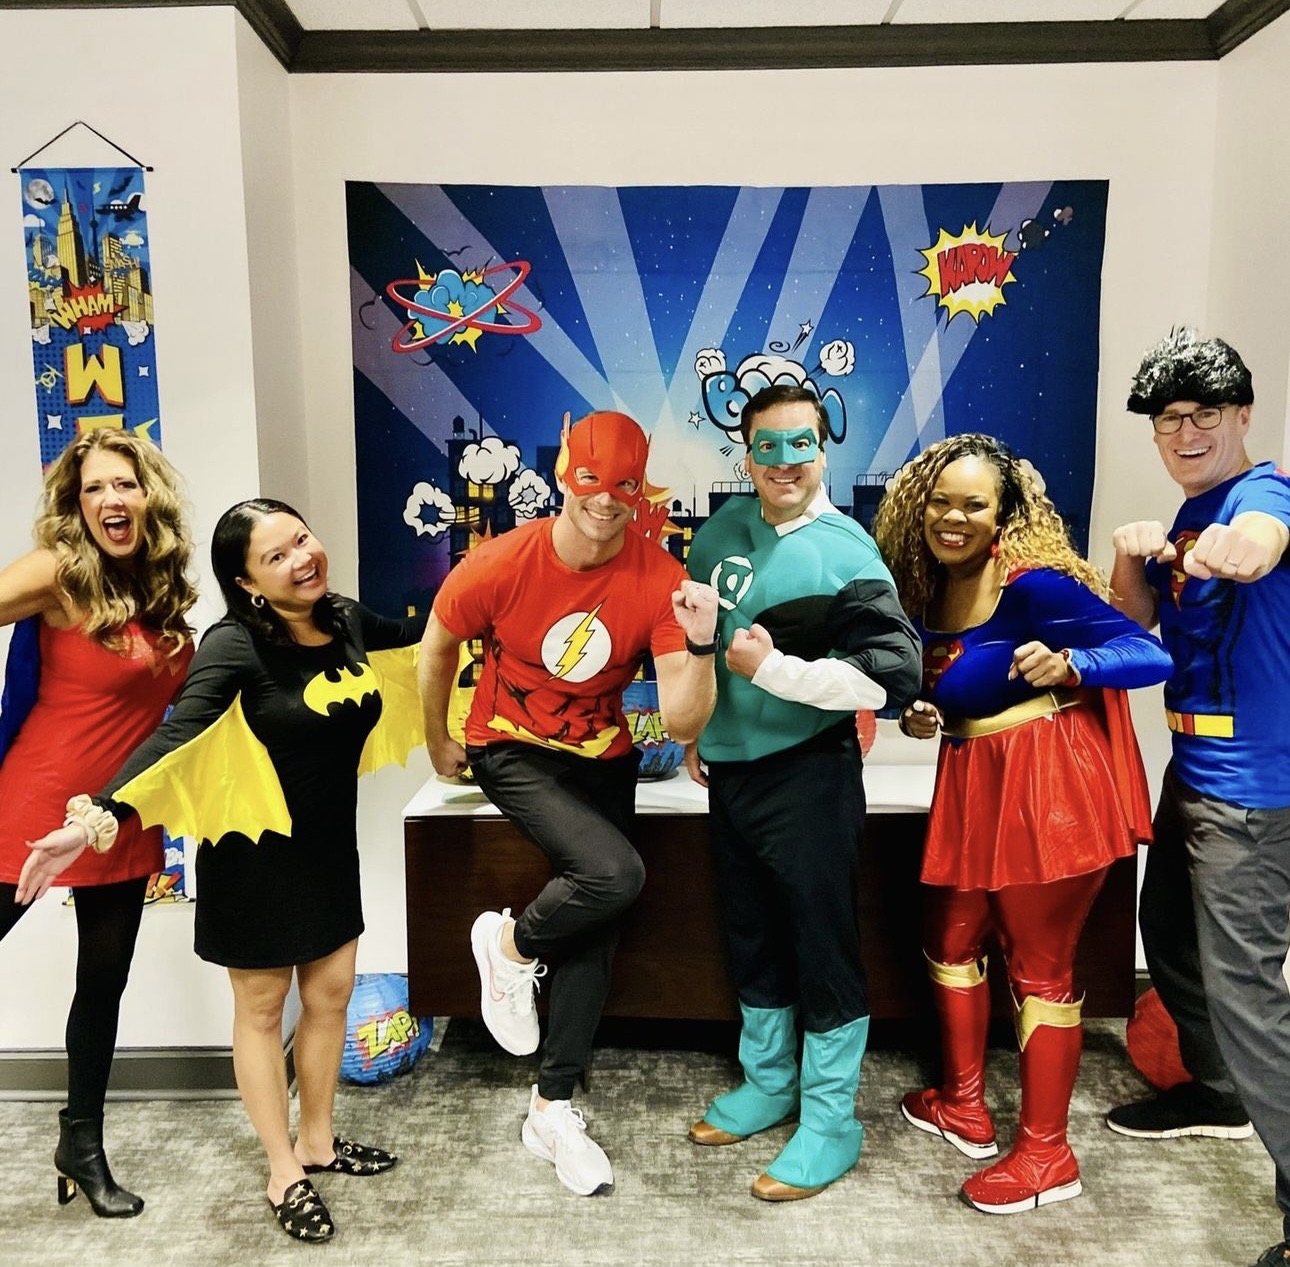 Halloween is always a major event at PlainsCapital! Our employees have so much fun dressing up and decorating our branches for the day. It’s just one of the many ways we have fun at work.